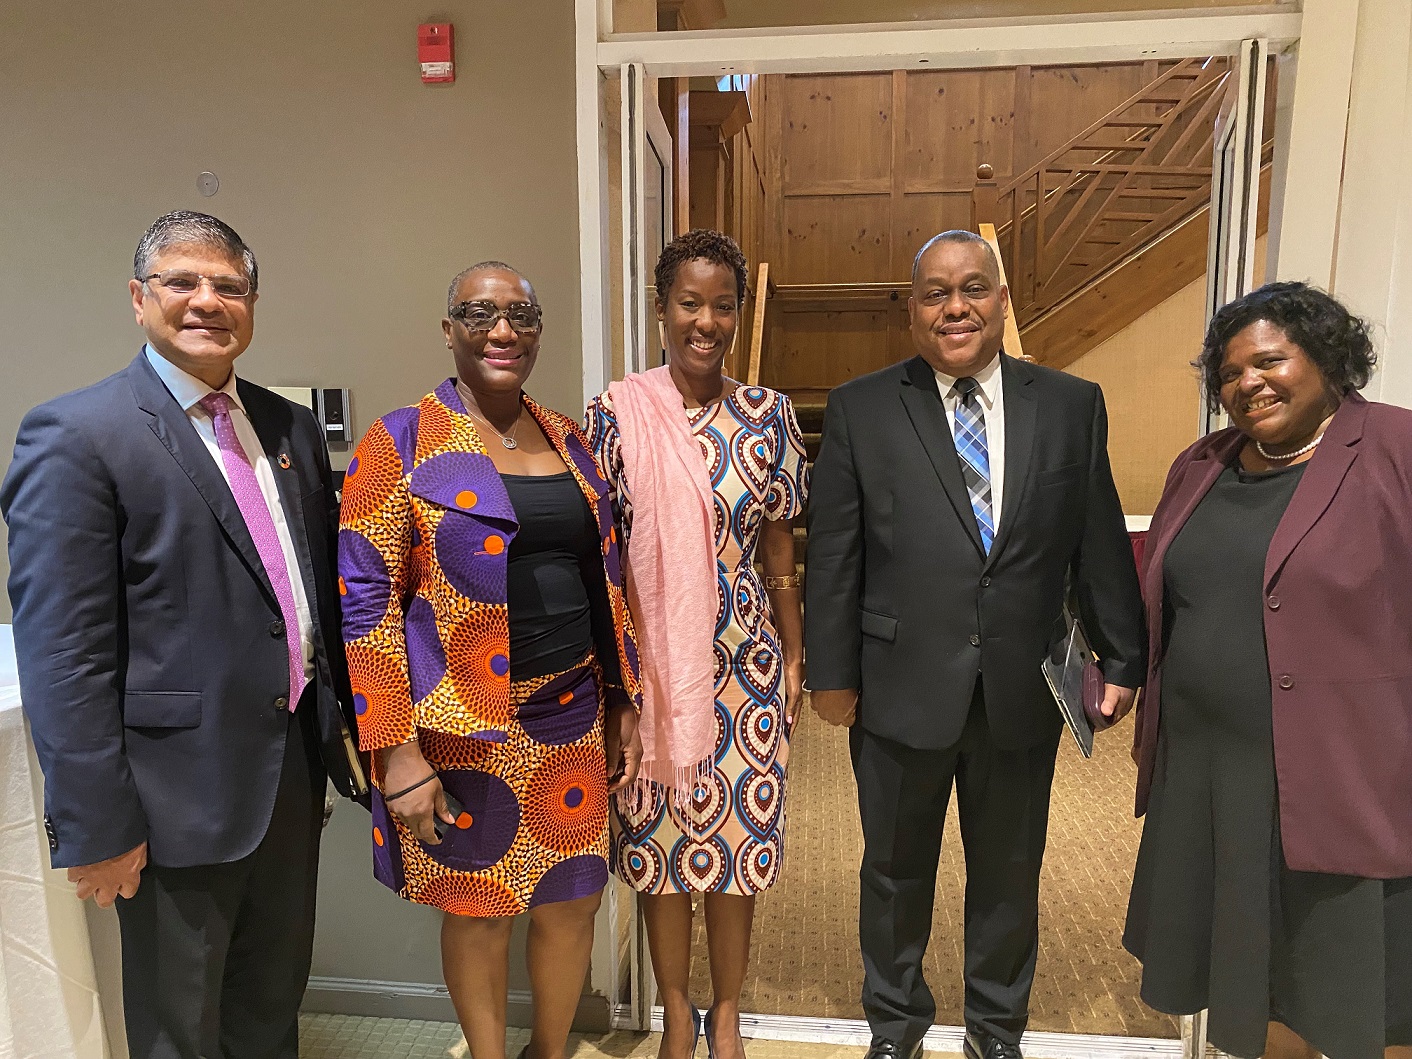 UN and Government of Bermuda official at launch of Joint SDG funded project